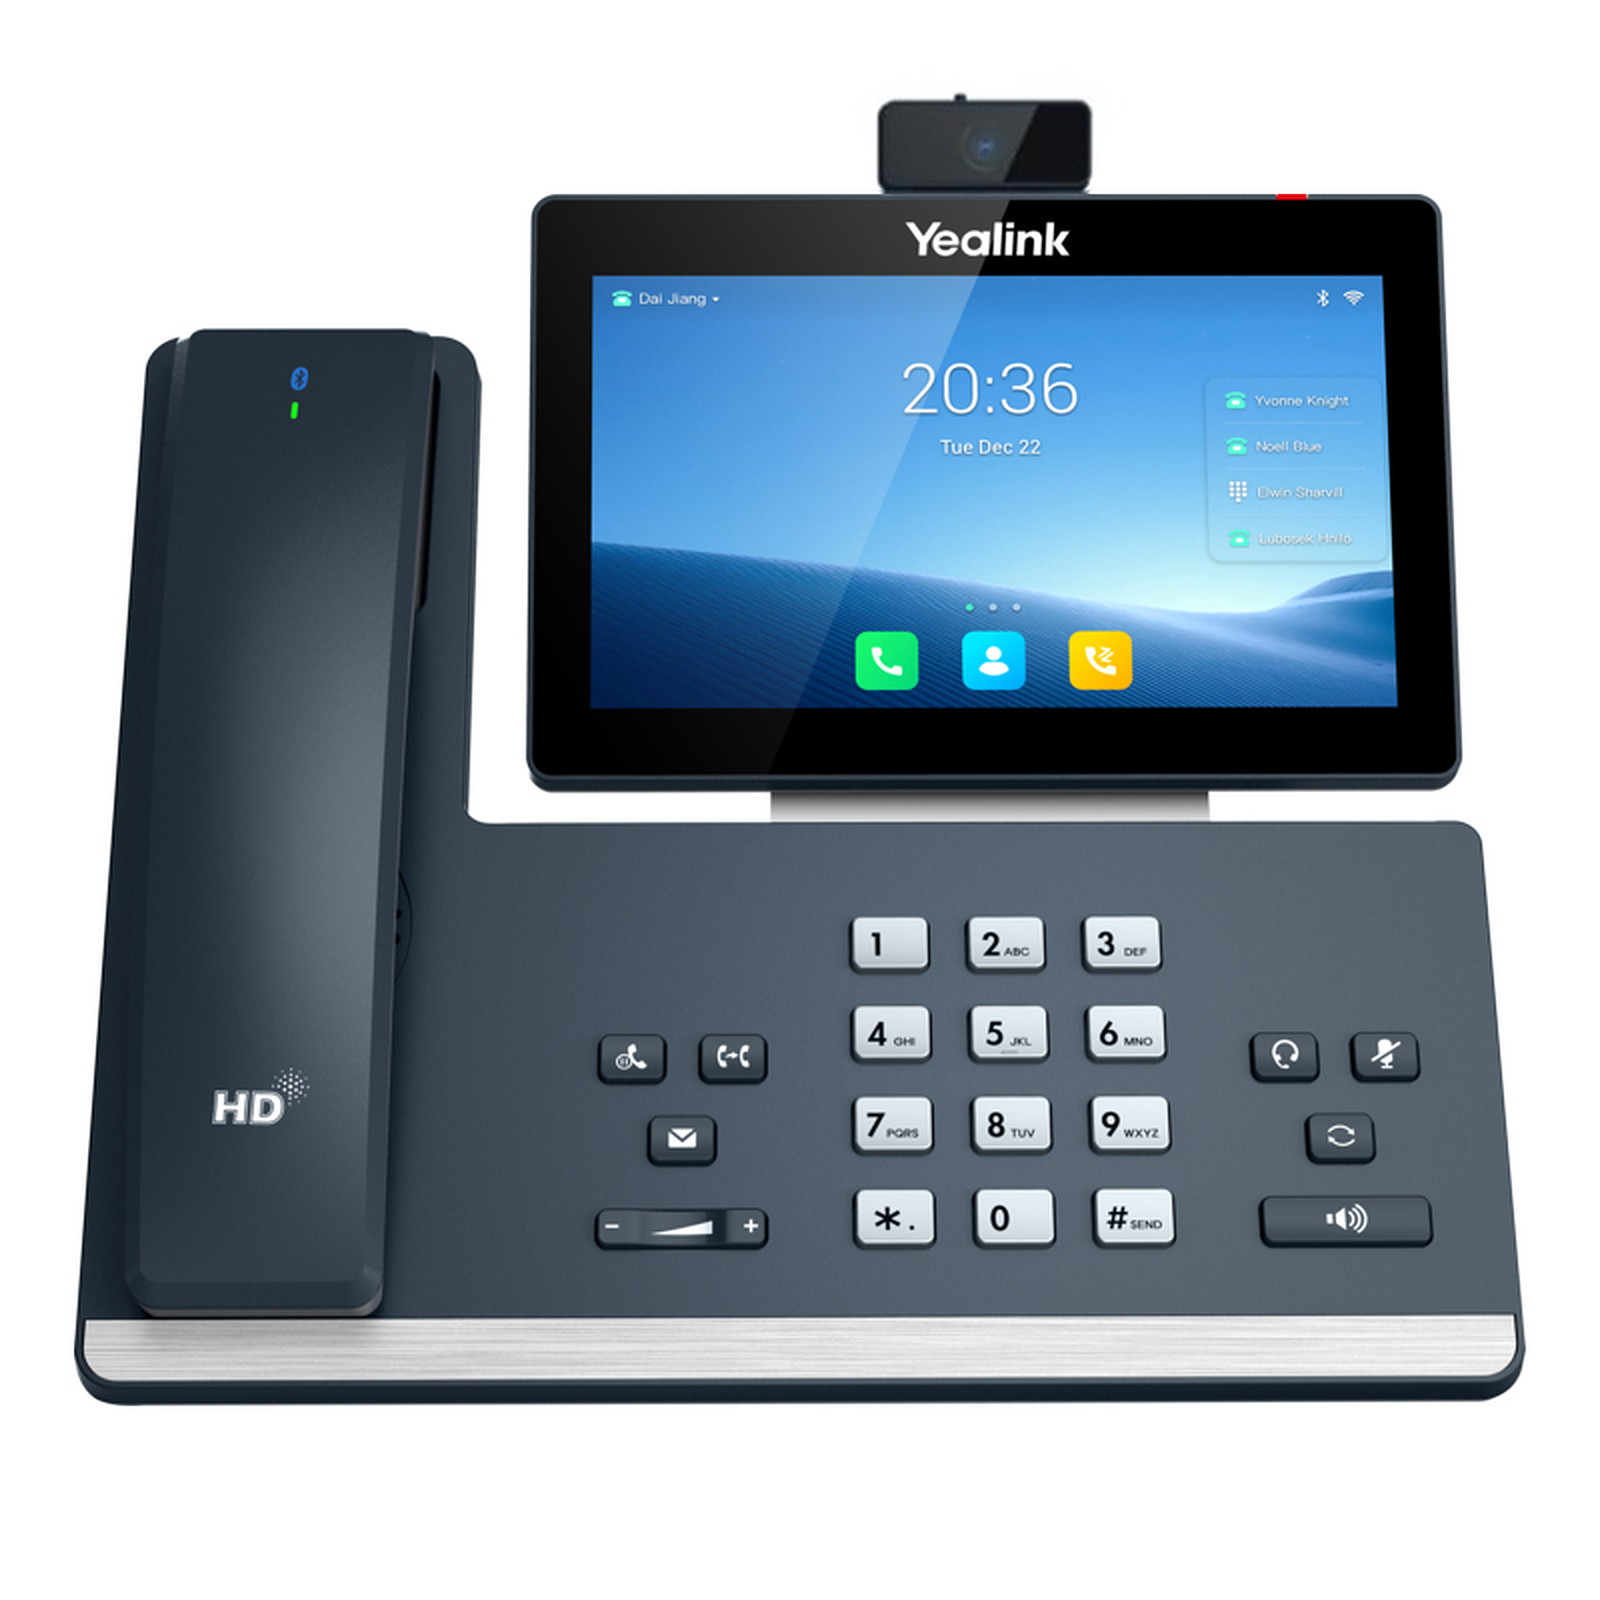 Yealink-T58W-Pro-with-Camera-Business-IP-Phone main view